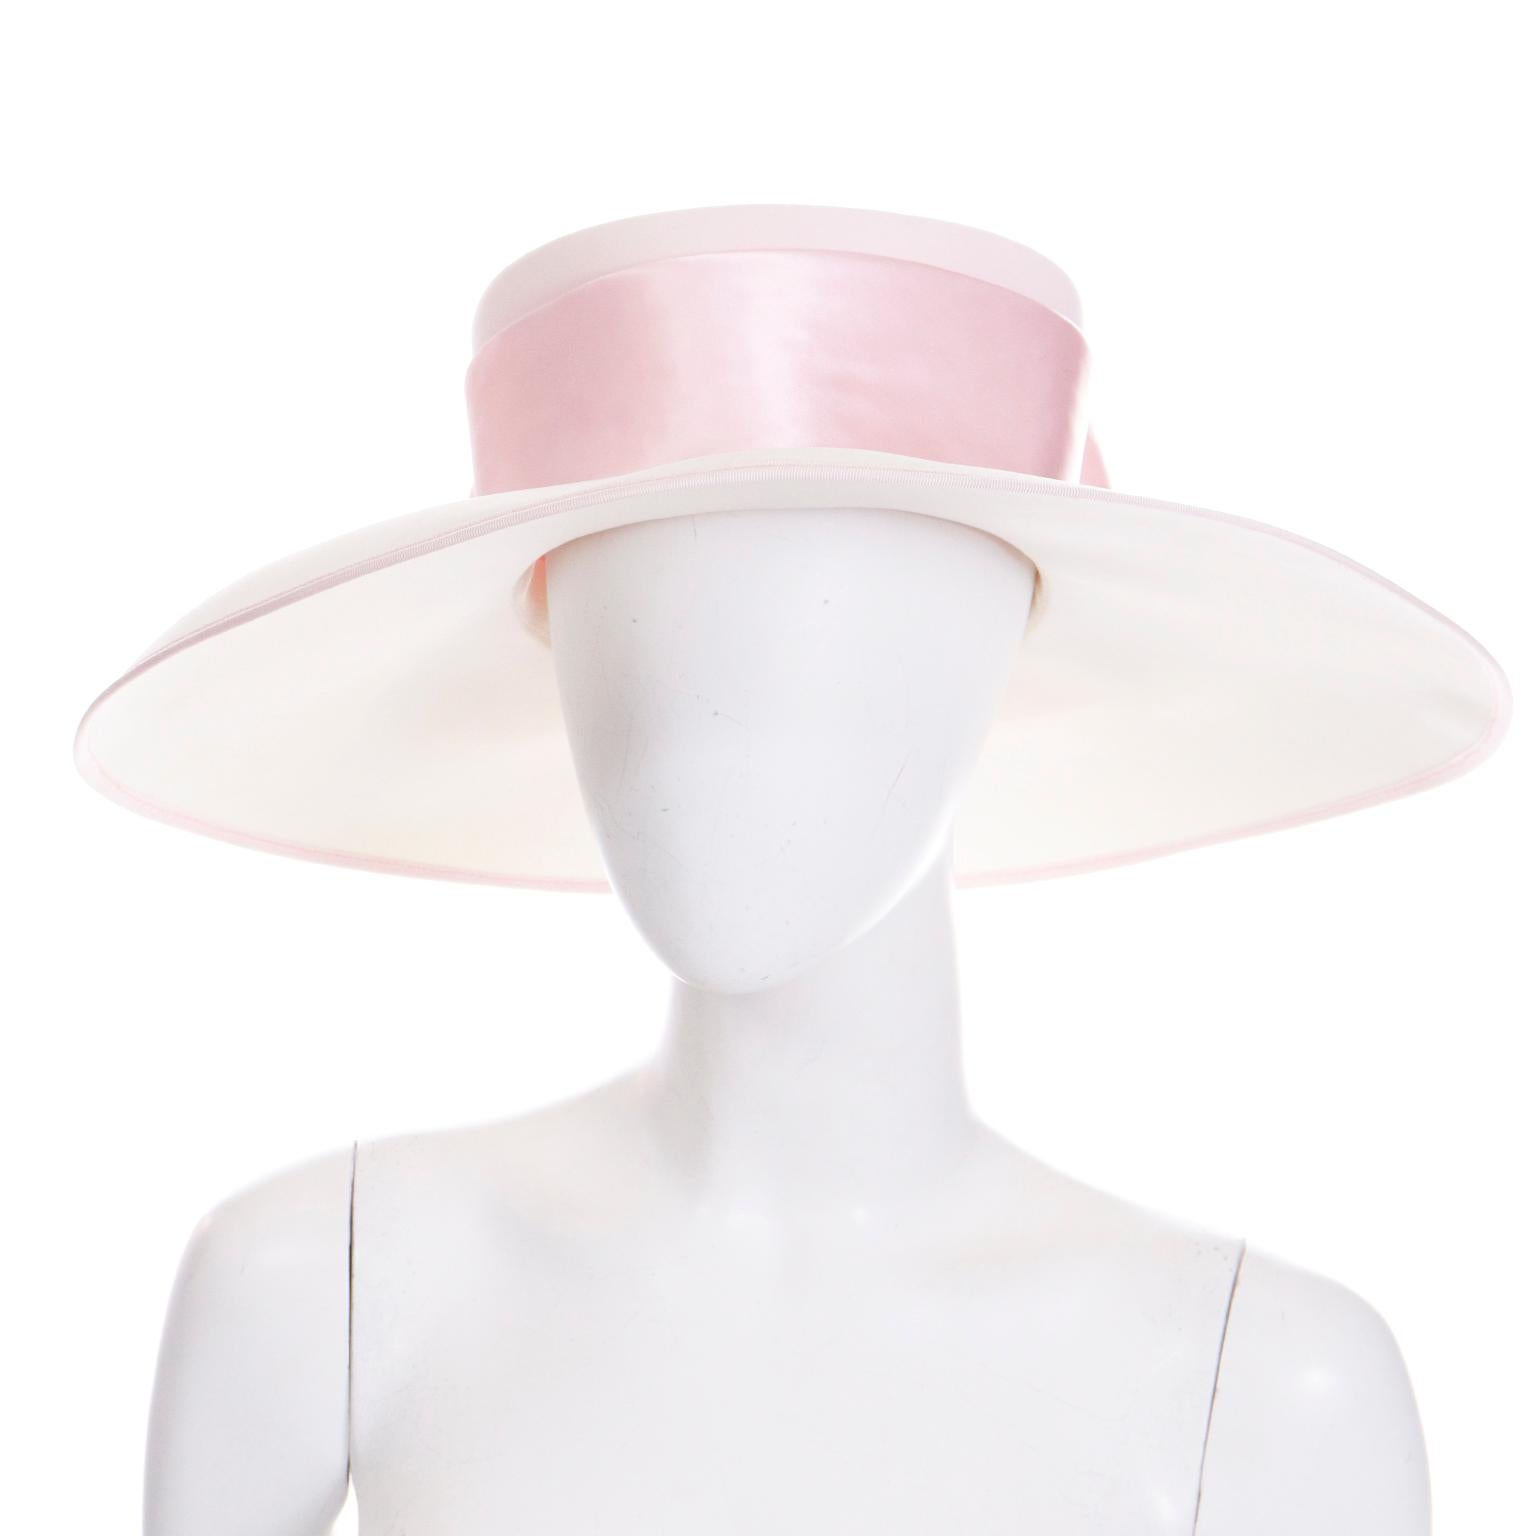 This is a lovely vintage Peter Bettley London 1980's wide brimmed hat in cream with a wide pink satin bow and ribbon on the crown. The perimeter of the brim is trimmed in a pink grosgrain ribbon. We especially love the way the brim is wider in the